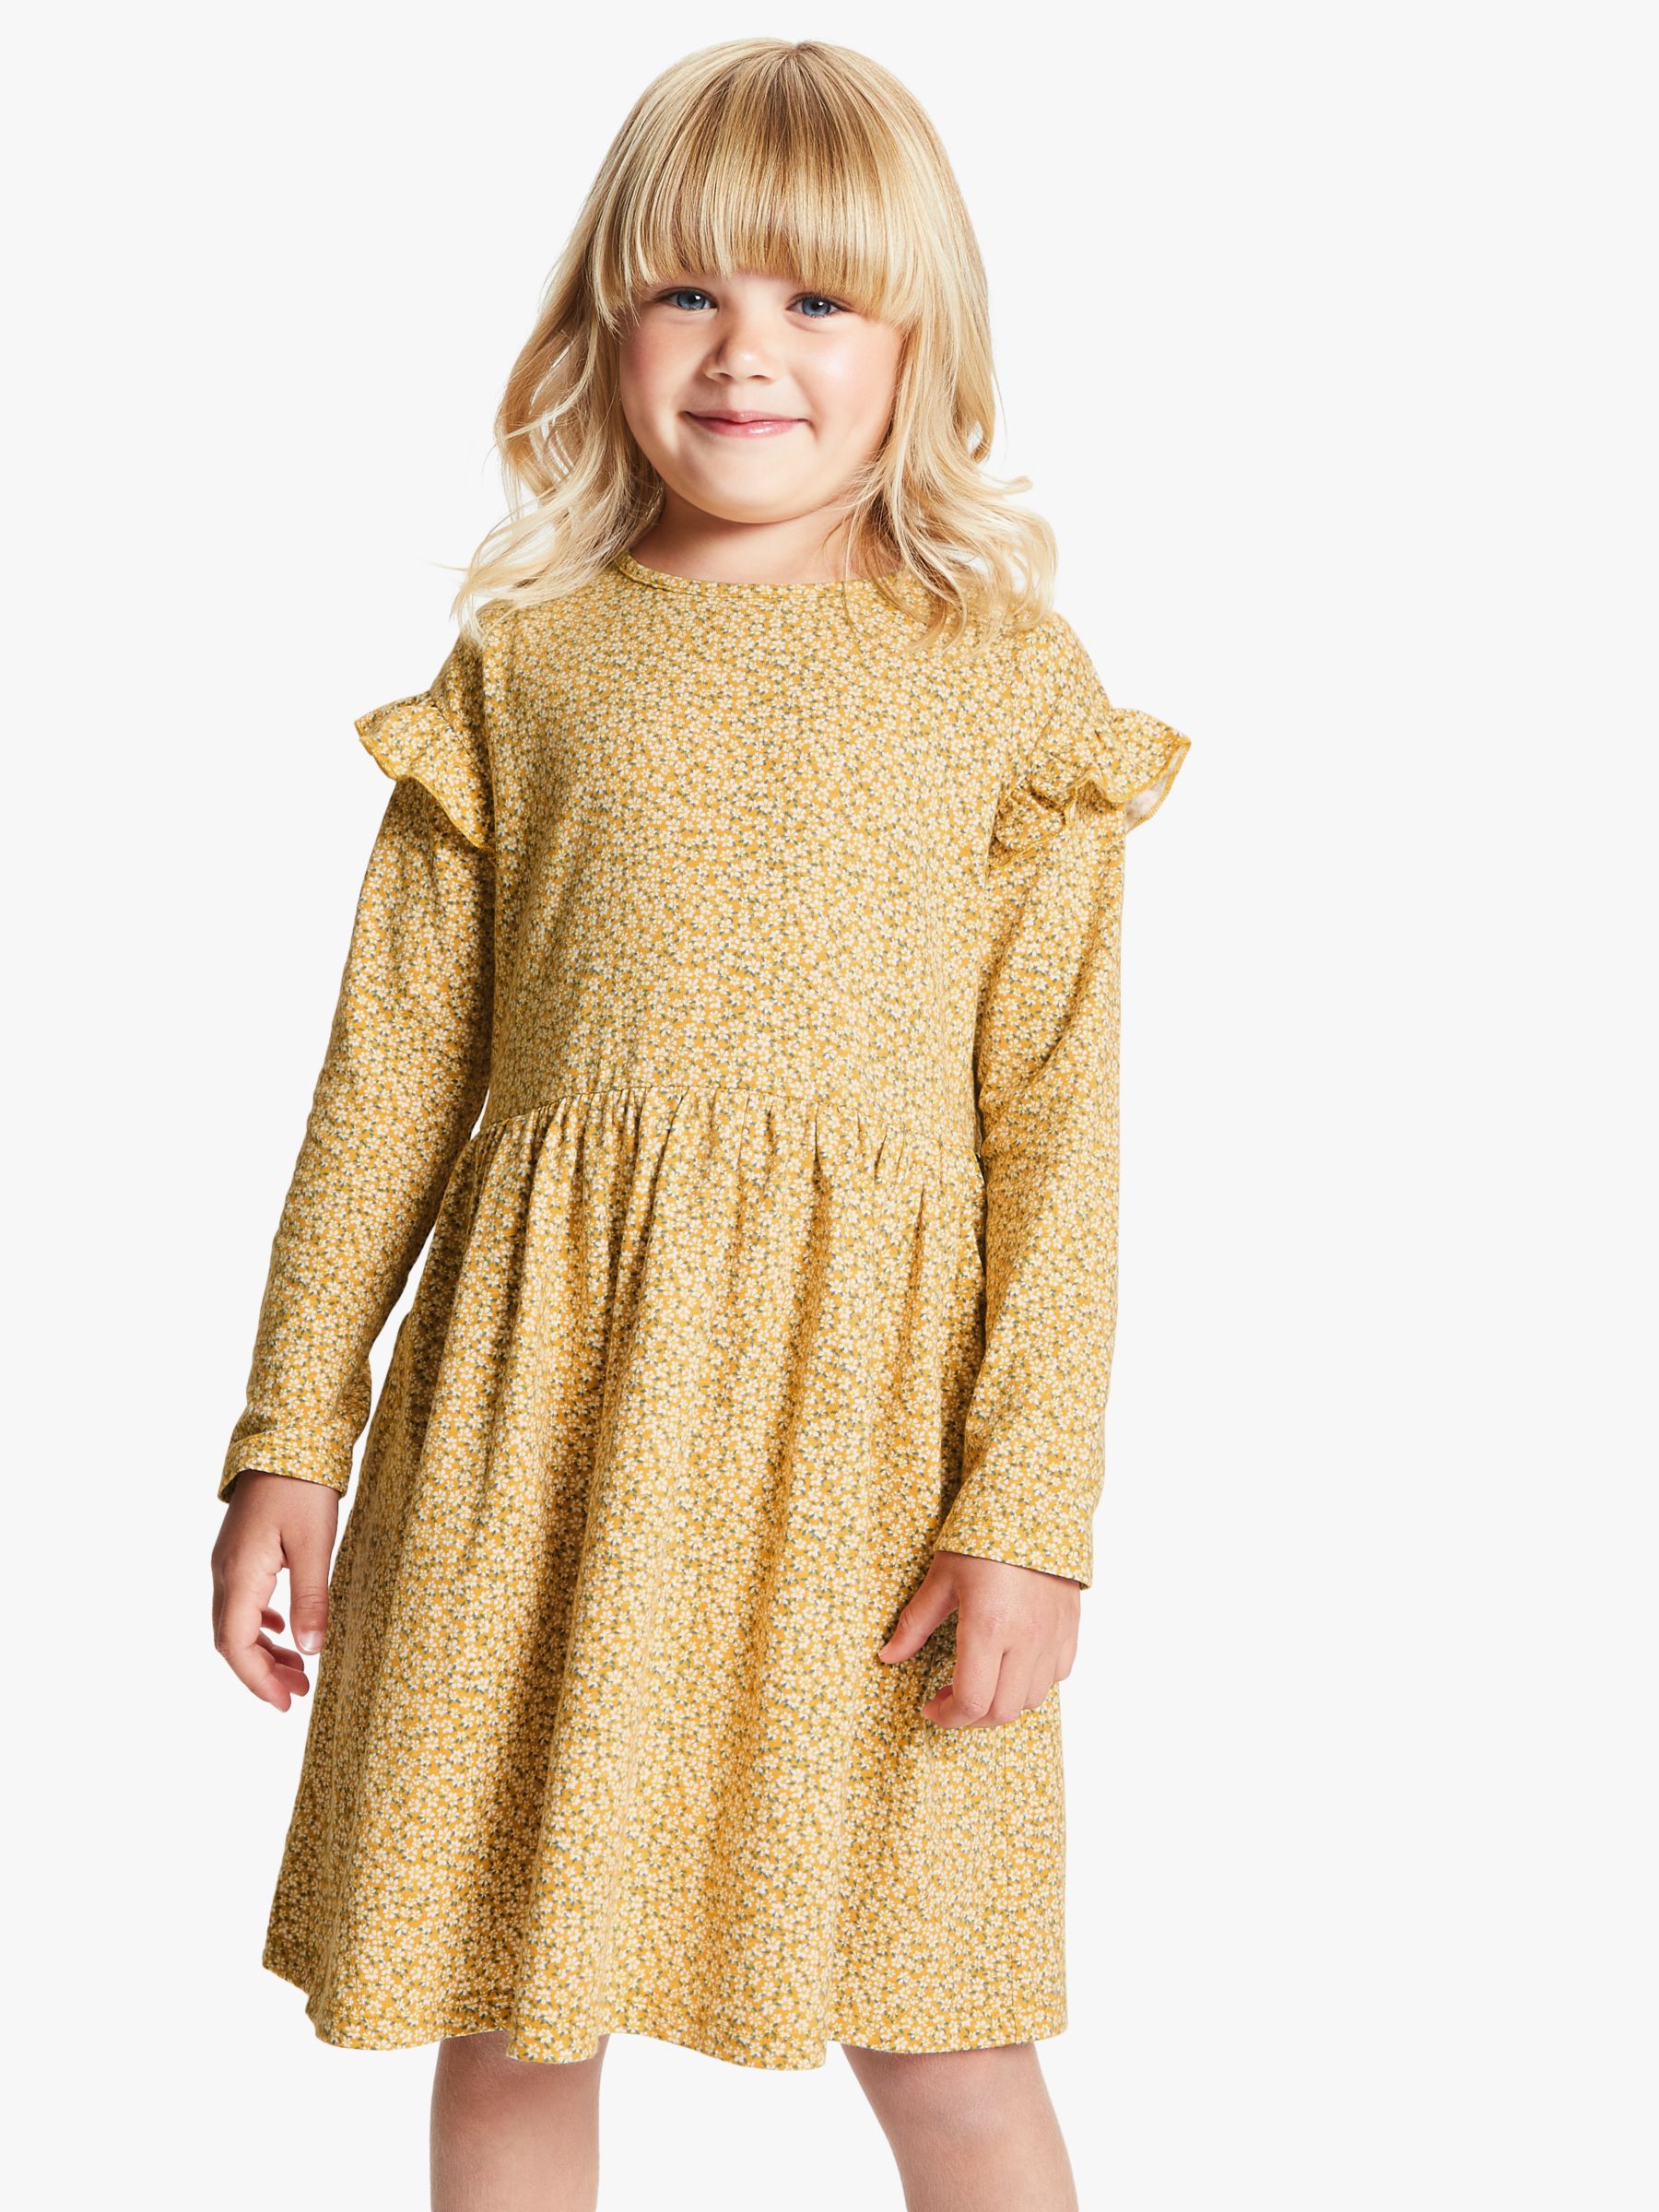 Image of John Lewis and Partners Girls Floral Print Dress Yellow